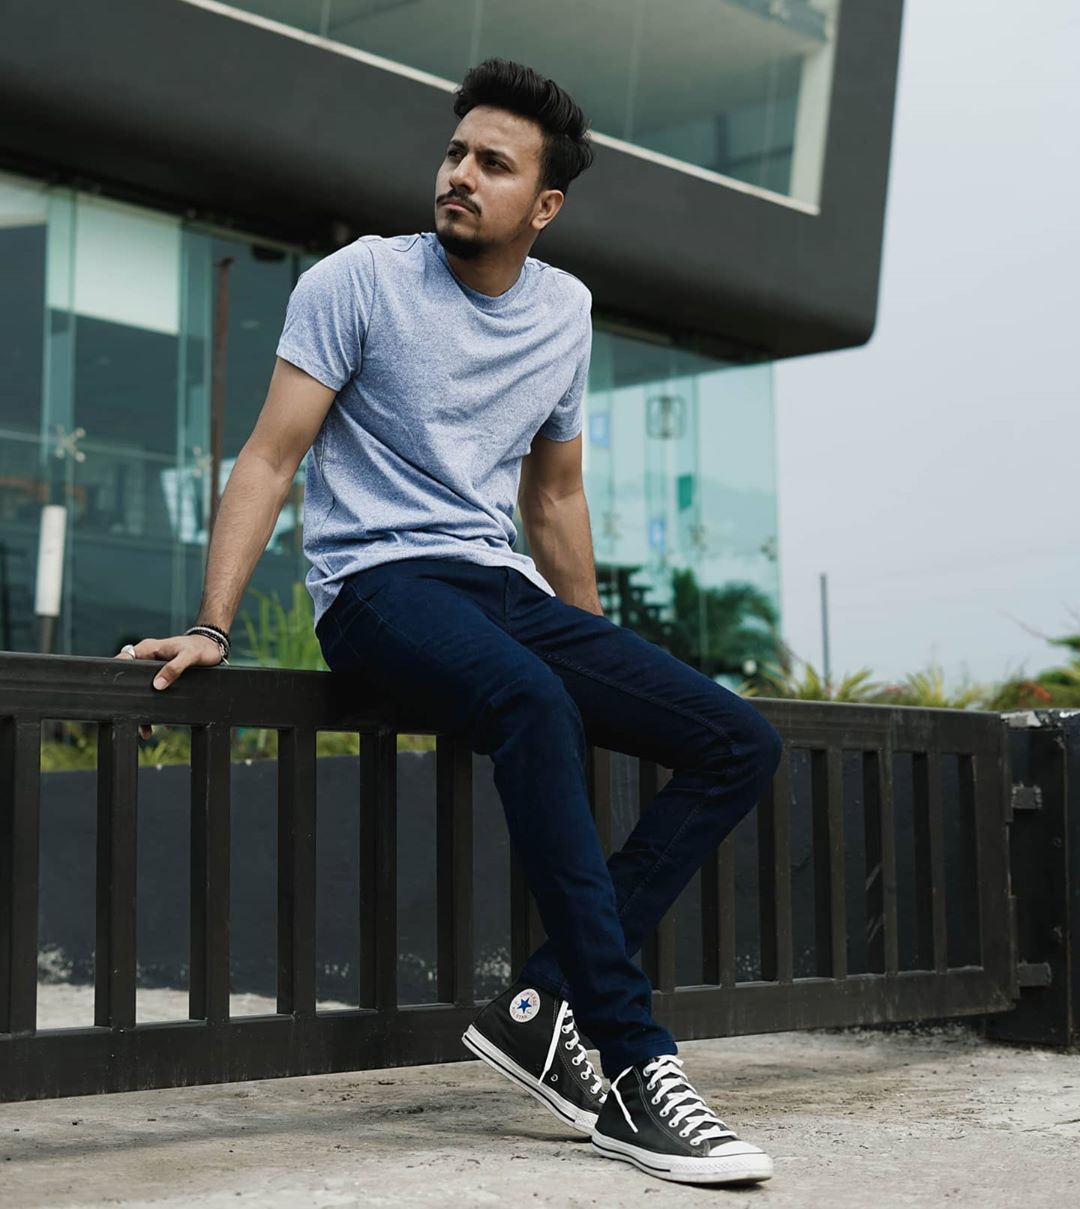 MYNTRA - Turn your #MondayBlues into a tone-on-tone style statement. 
CLICK @thesept_boy
Look up product code: 12125402 (t-shirt) / 8168953 (jeans) / 8552567 (shoes) 
For more on-point looks, styling...